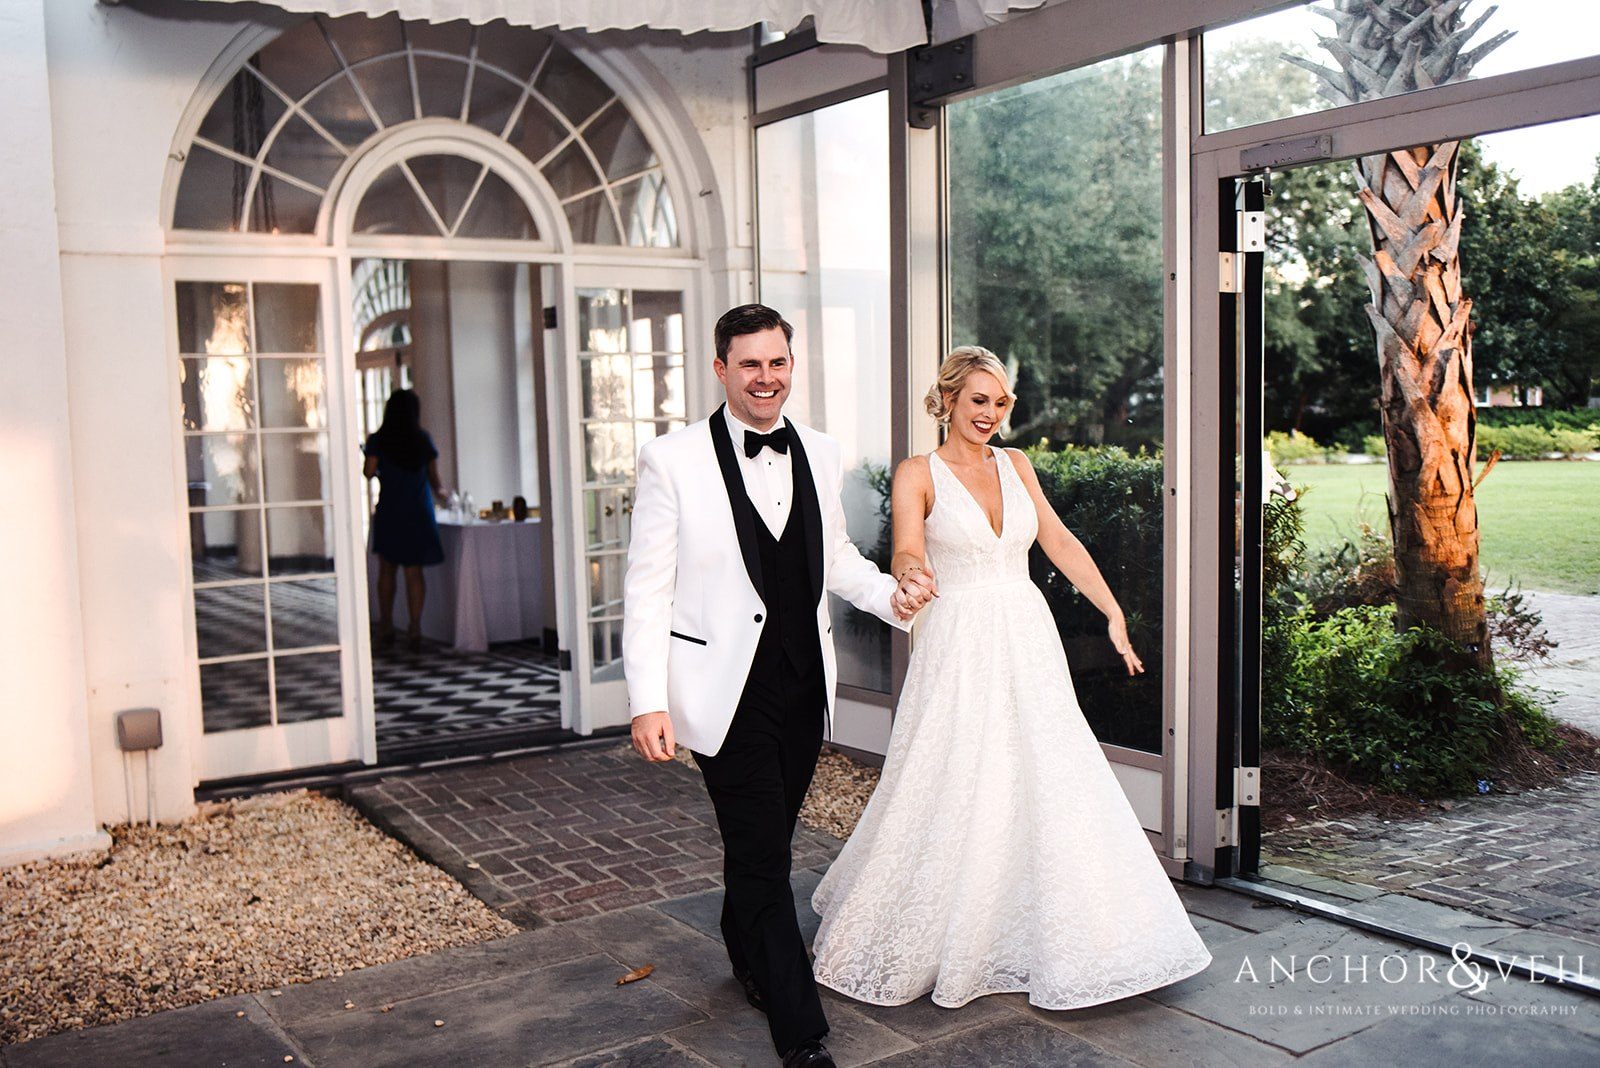 The bride and groom entering the reception at the Lowndes Grove Plantation Wedding